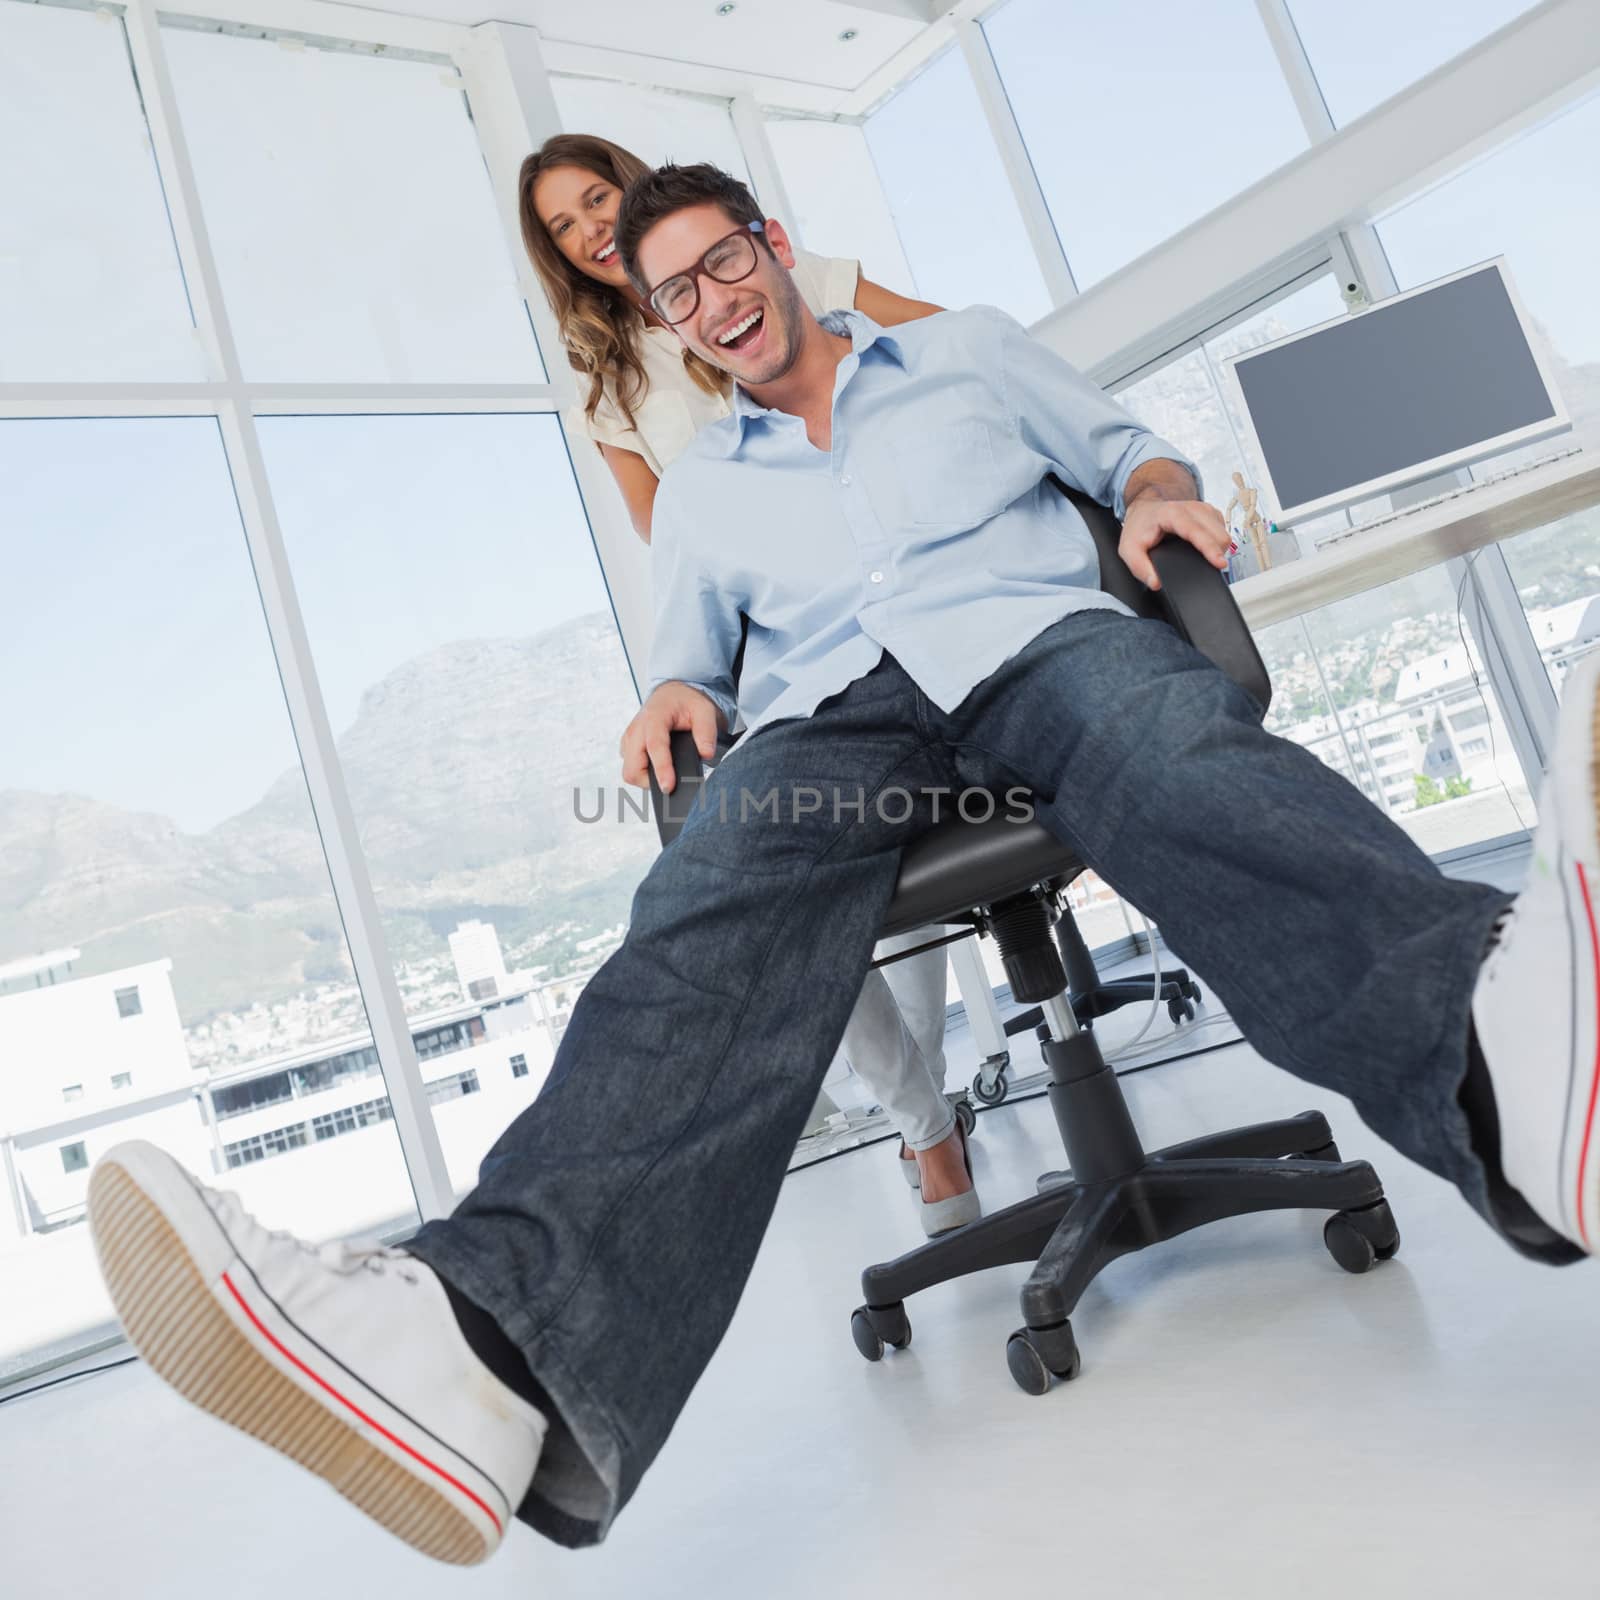 Smiling designers having fun with on a swivel chair by Wavebreakmedia